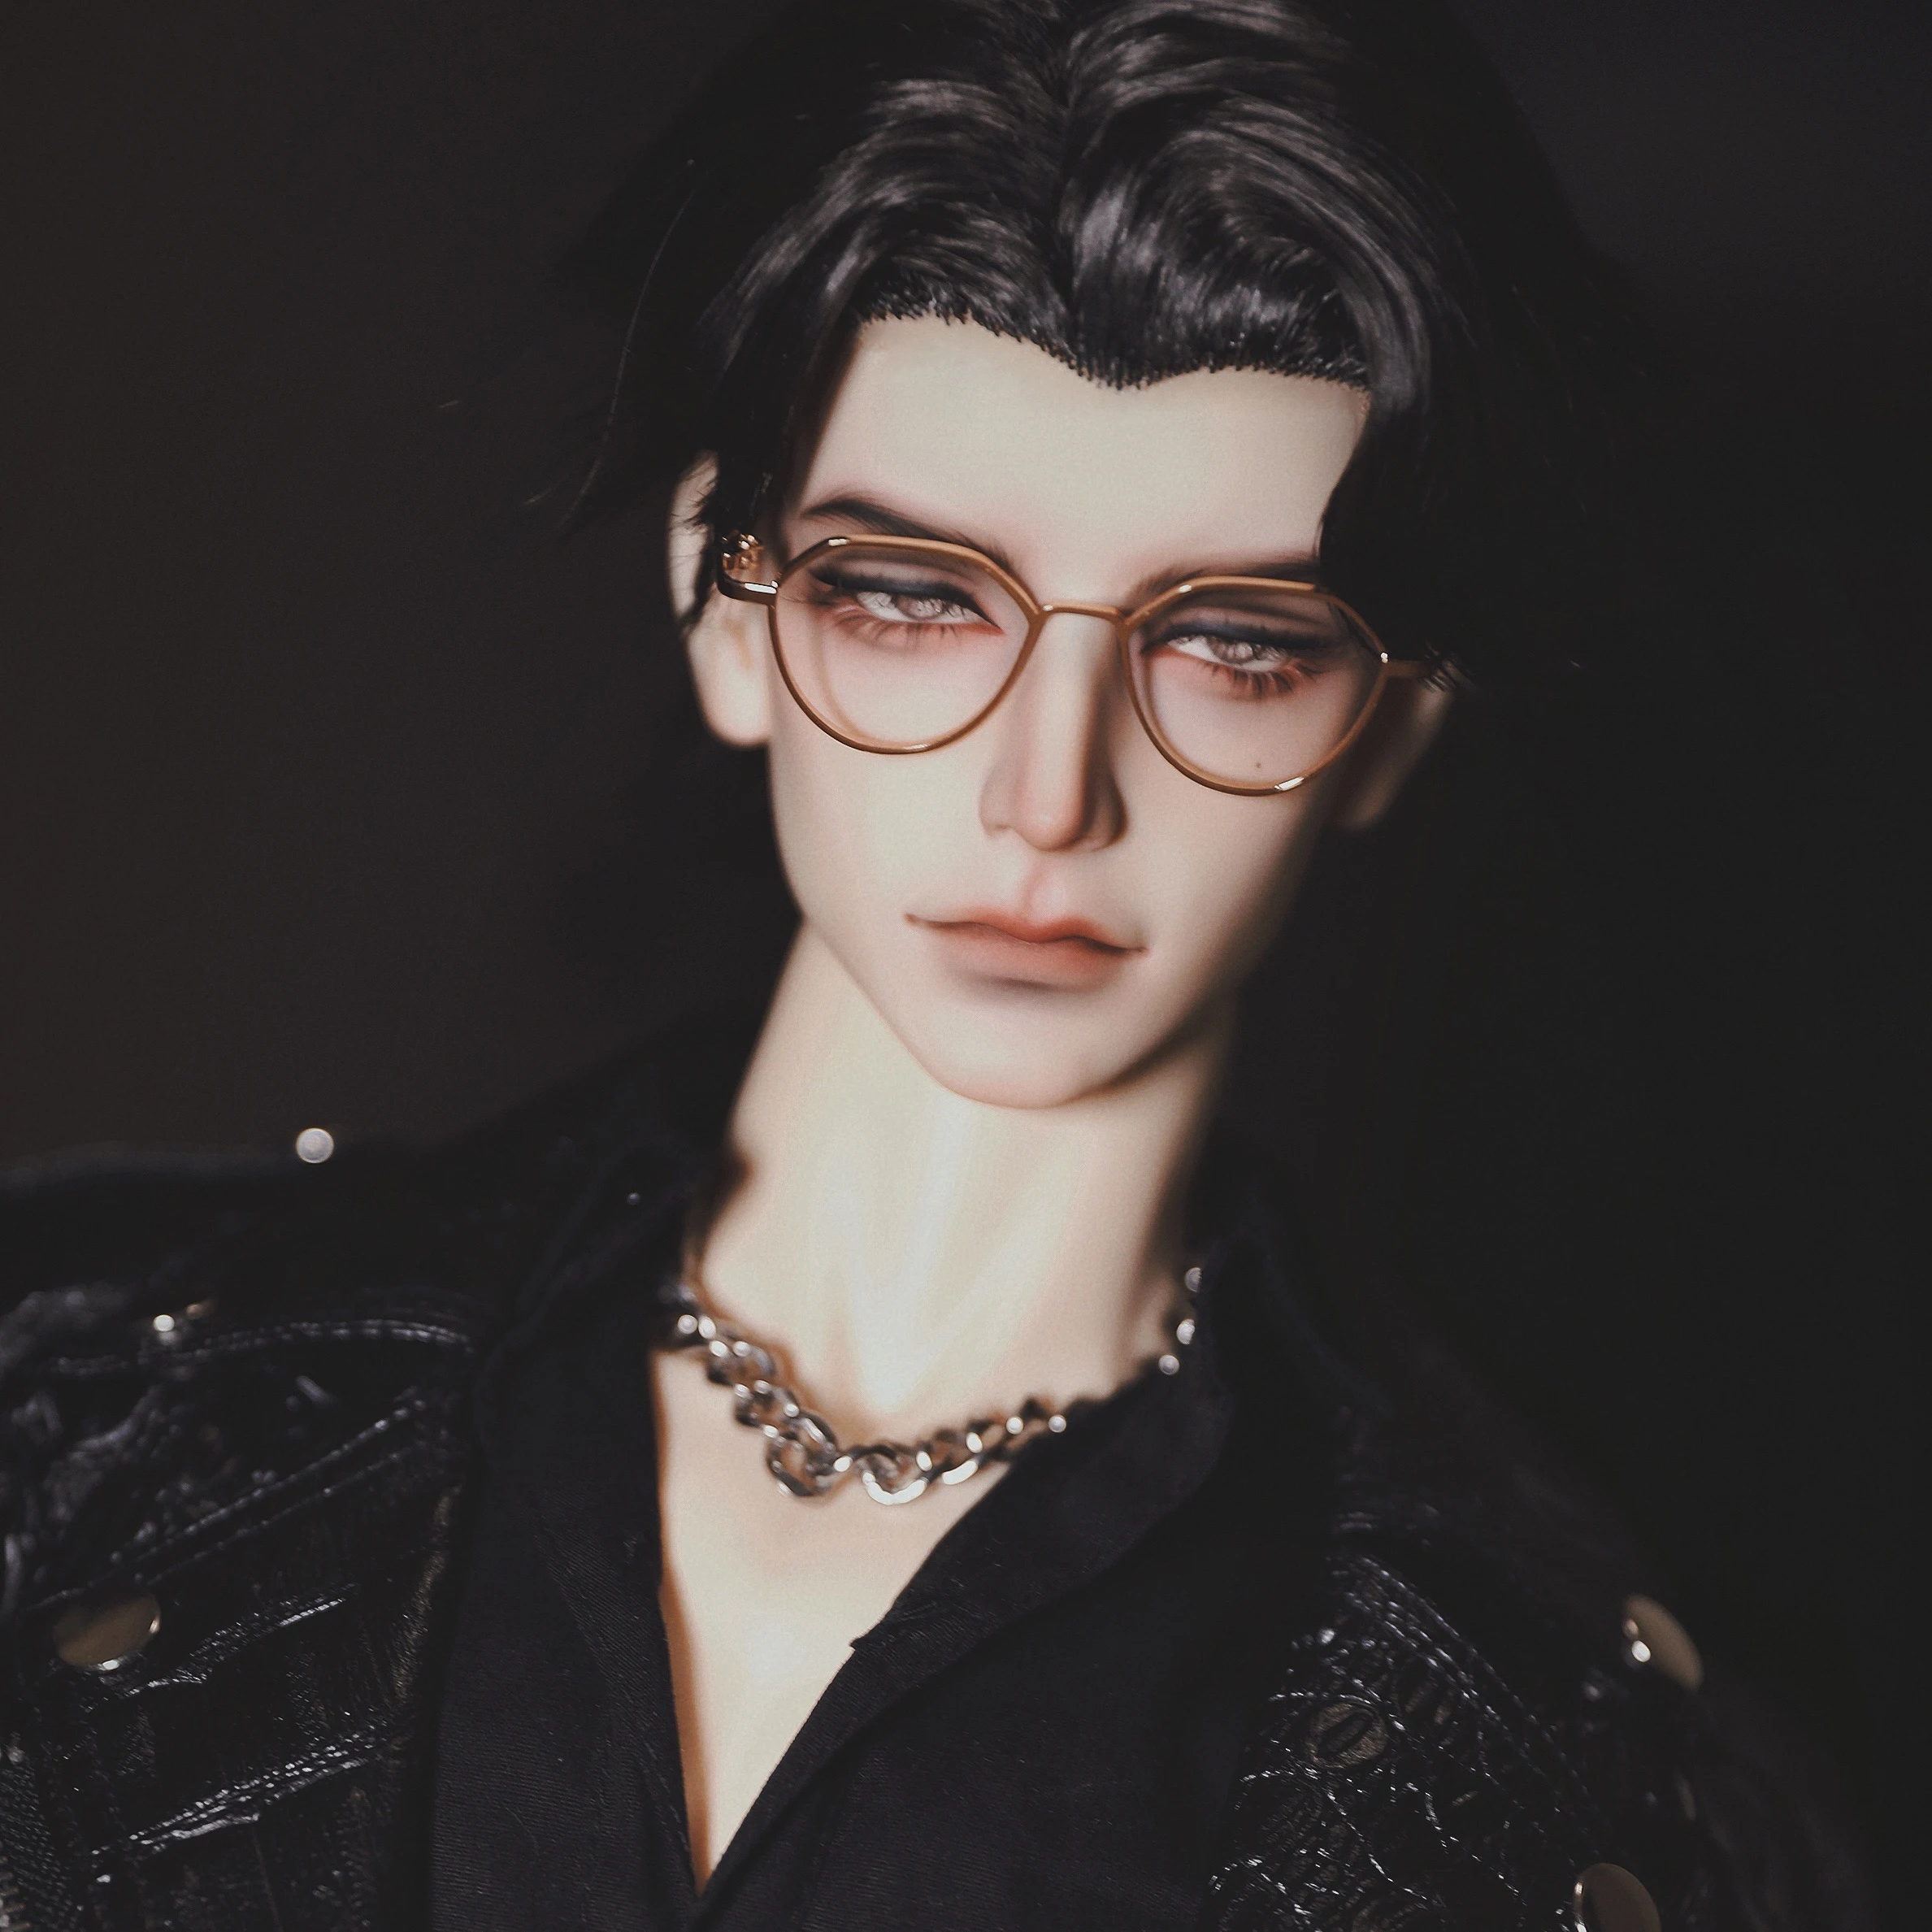 New 1/3 70cm BJD doll sd soon King Glasses Men's uncycle Zhuang can move spot advanced resin toy makeup